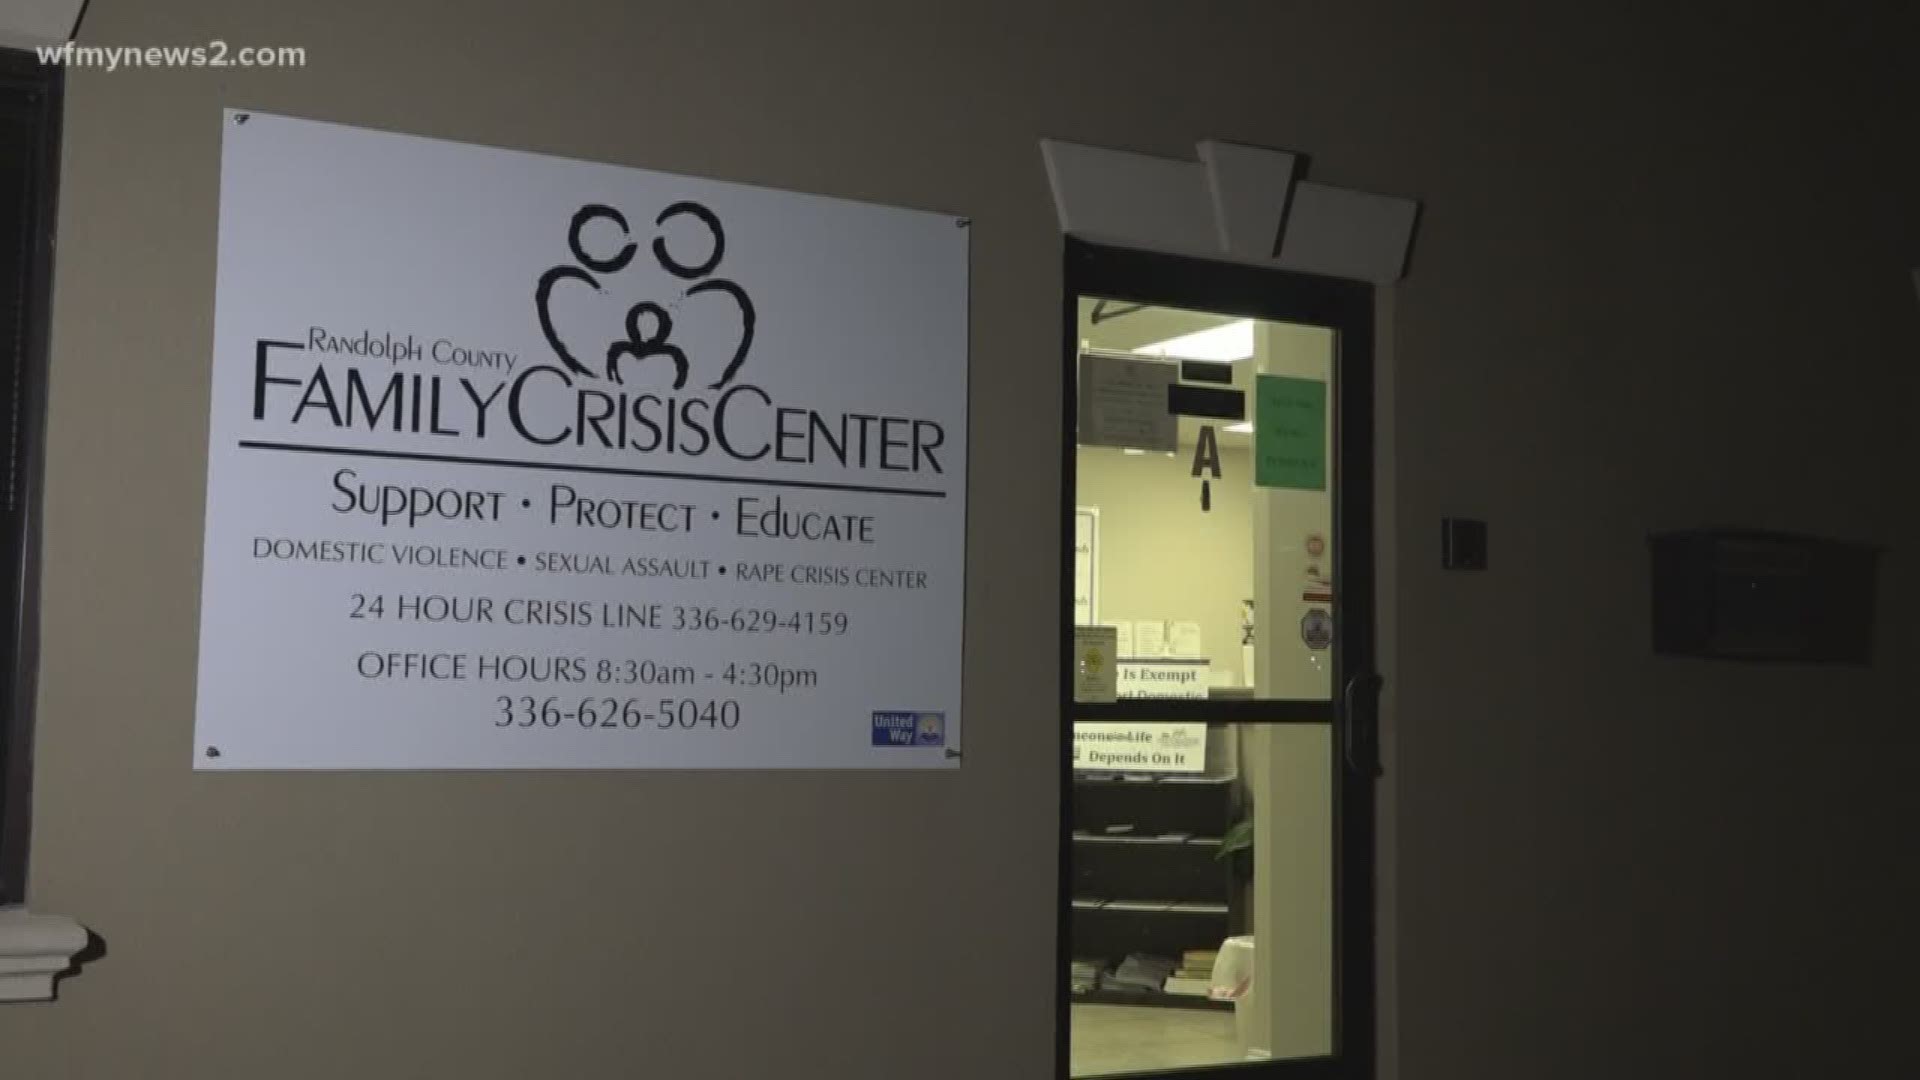 We spoke with a Randolph County woman who's grateful more women like her will be able to get out of their abusive situations because of the help Triad rape centers. She says these locations need to stay open to help people who truly need them